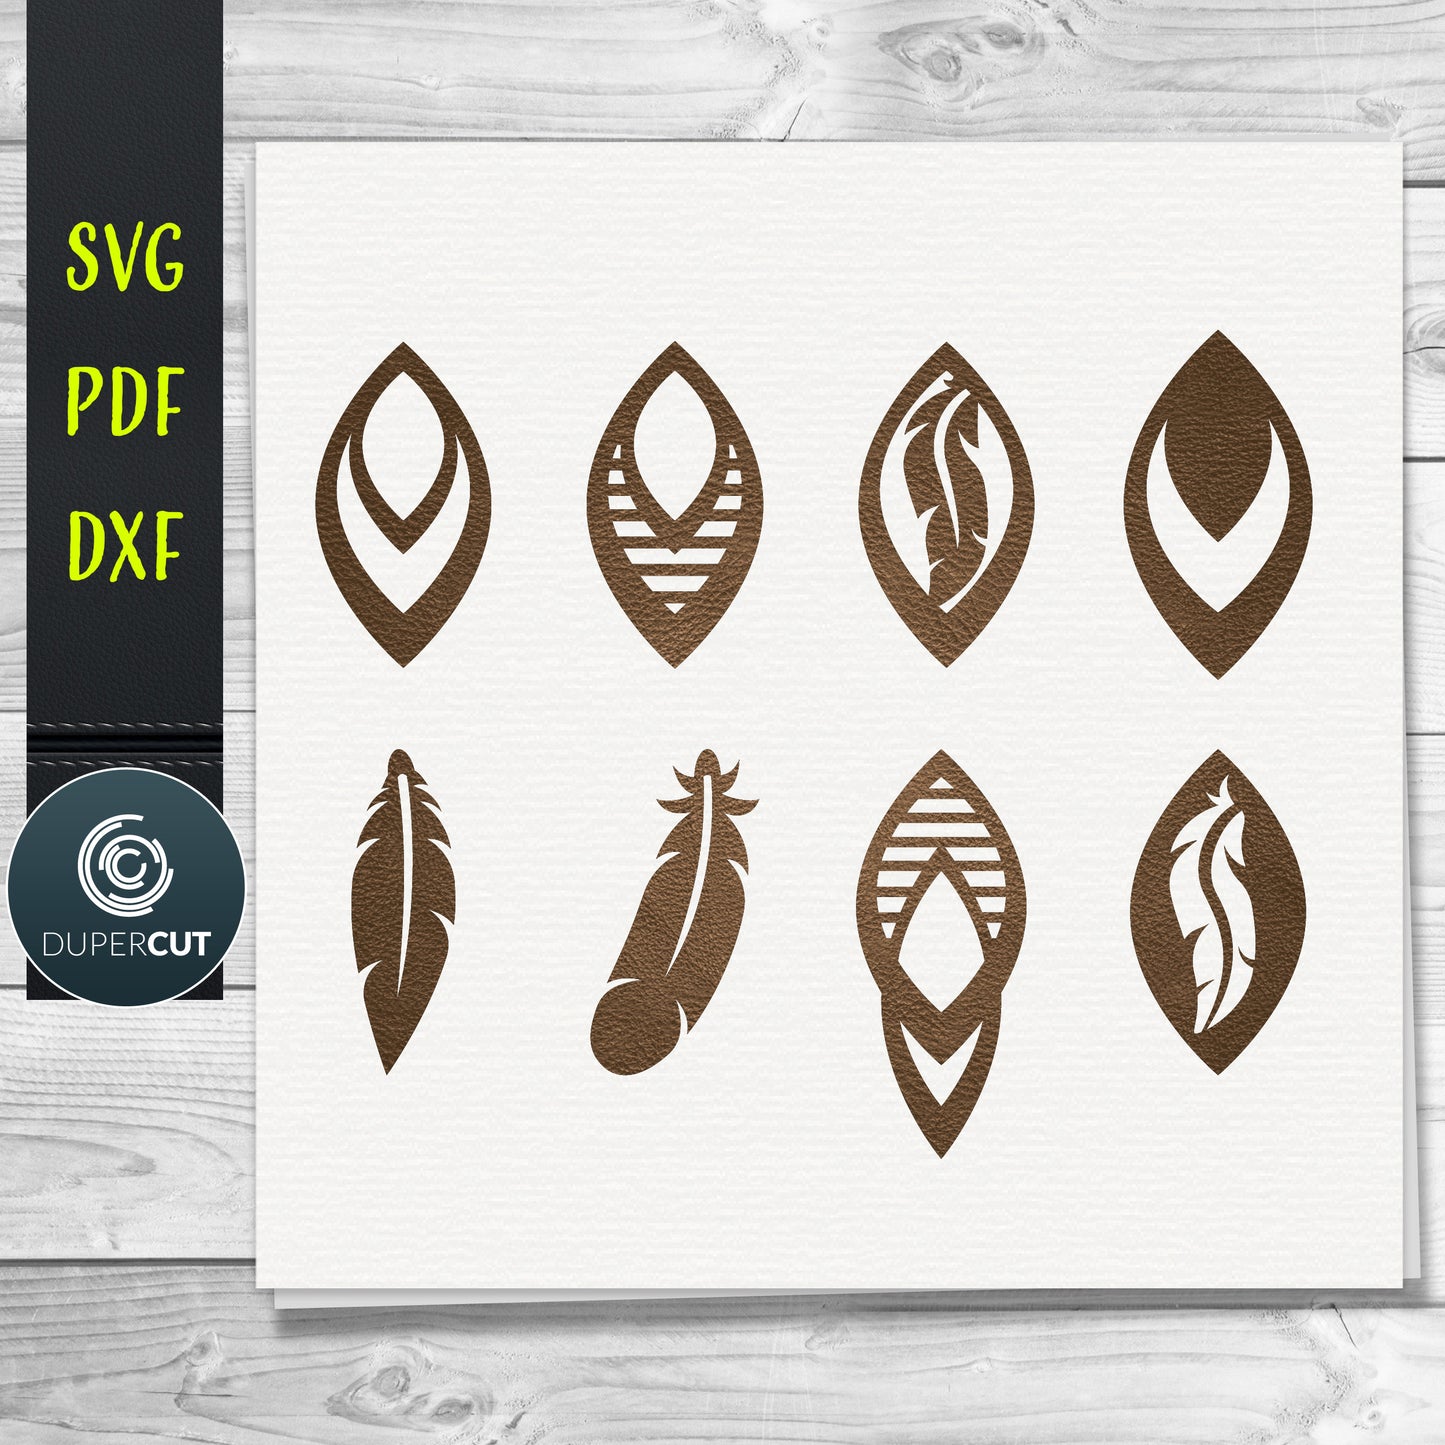 Feather Earrings SVG PDF DXF vector files. Jewellery making template for laser and cutting machines - Glowforge, Cricut, Silhouette Cameo.